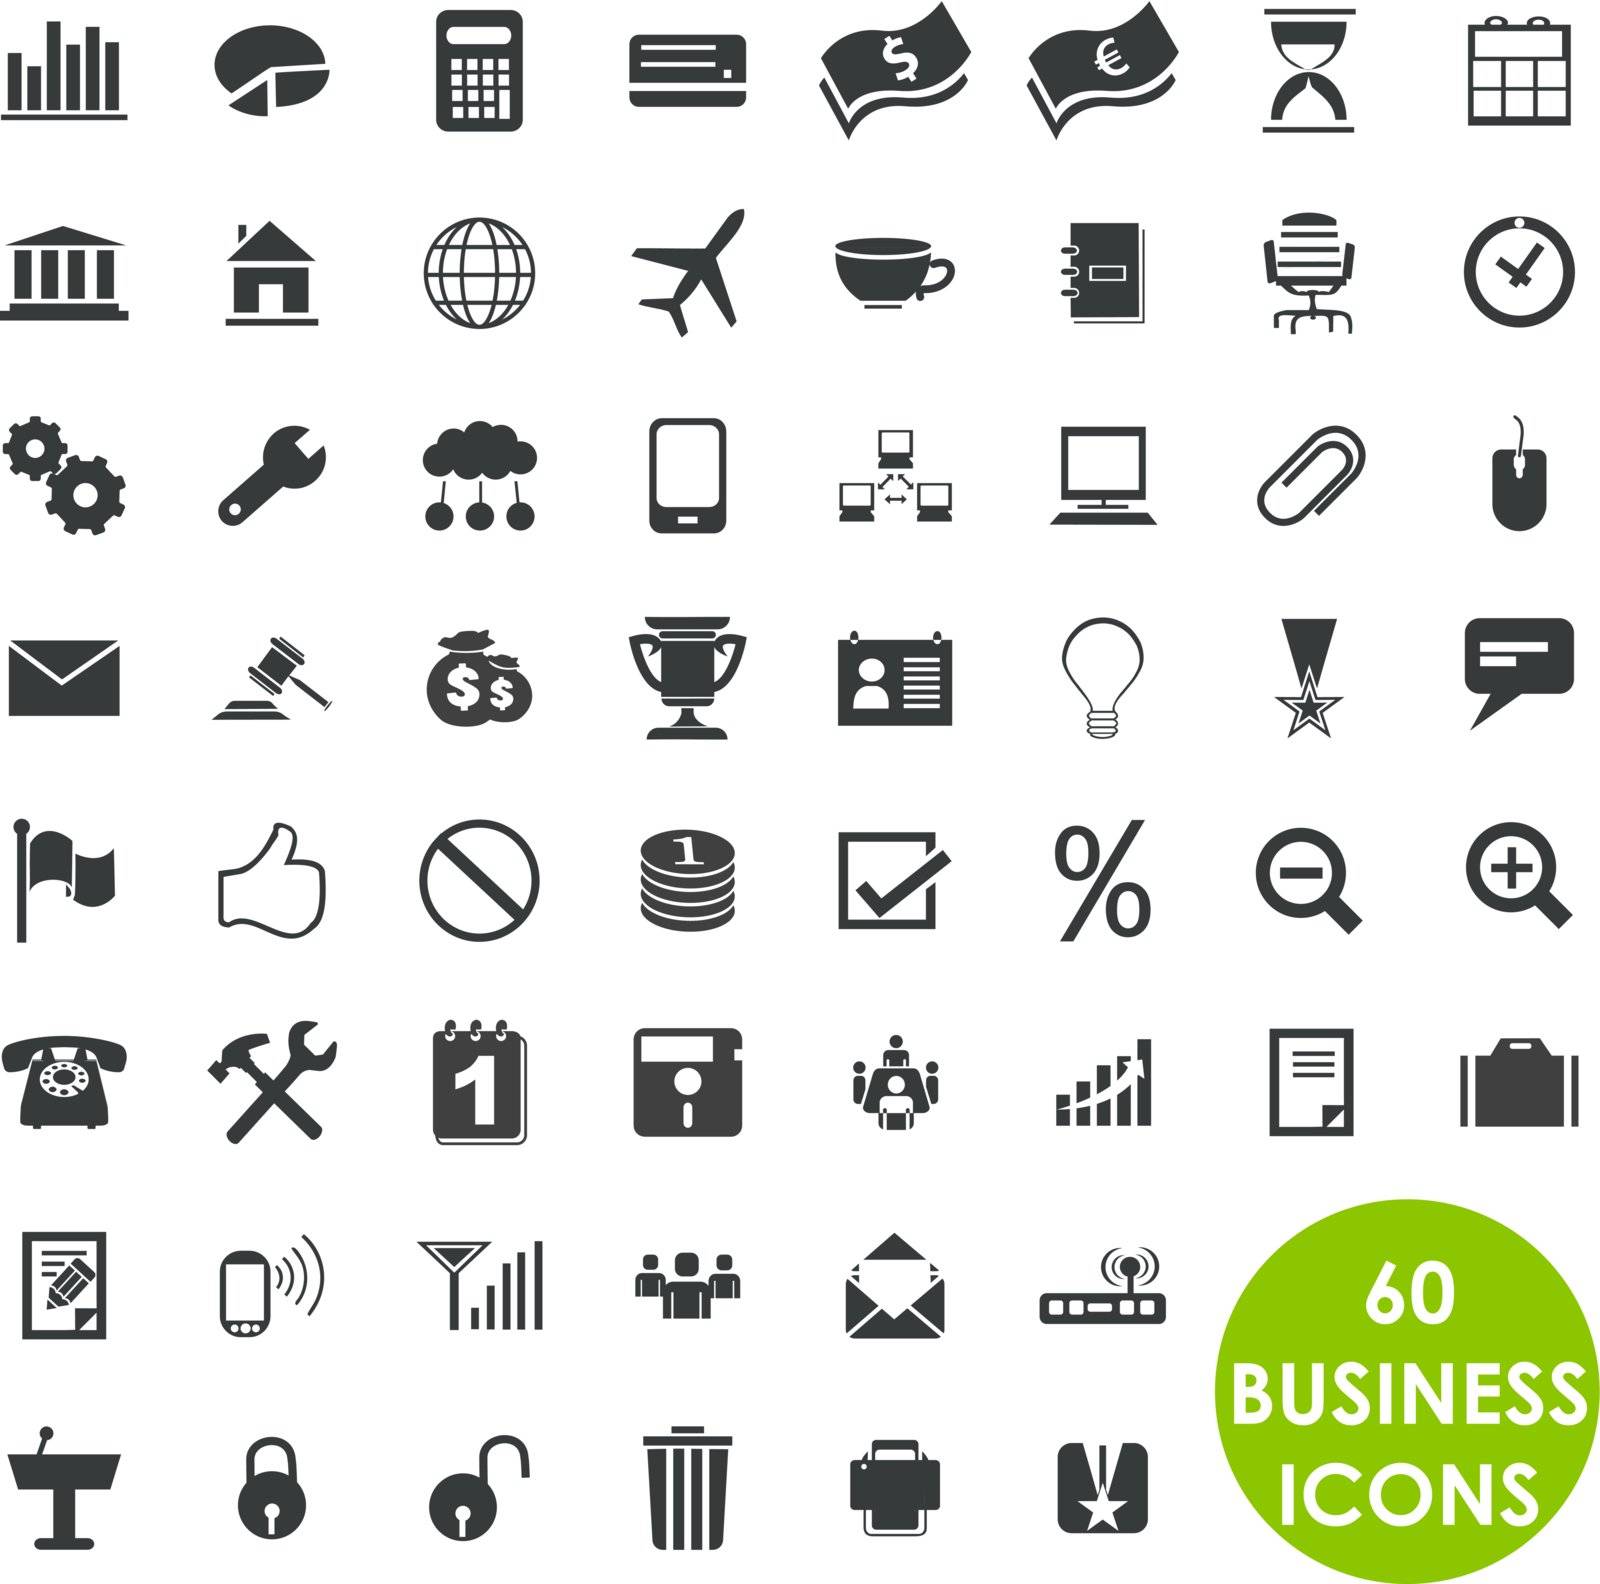 60 valuable creative business icons by mistervectors